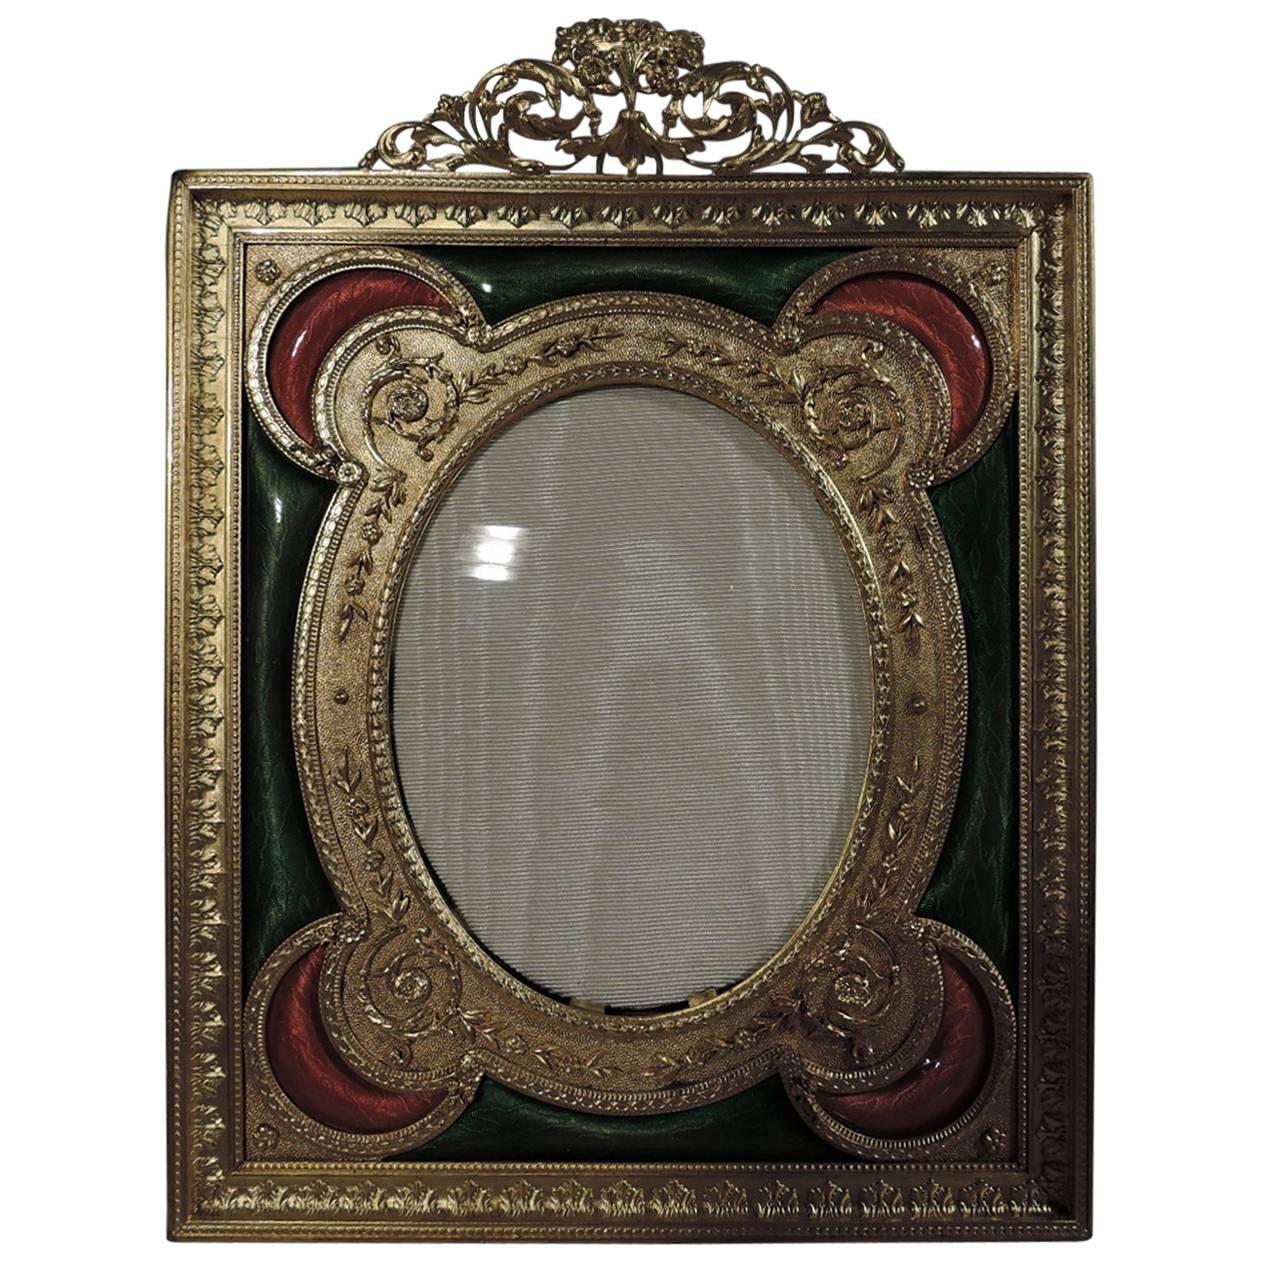 Antique French Gilt Bronze Picture Frame with Pink and Green Enamel